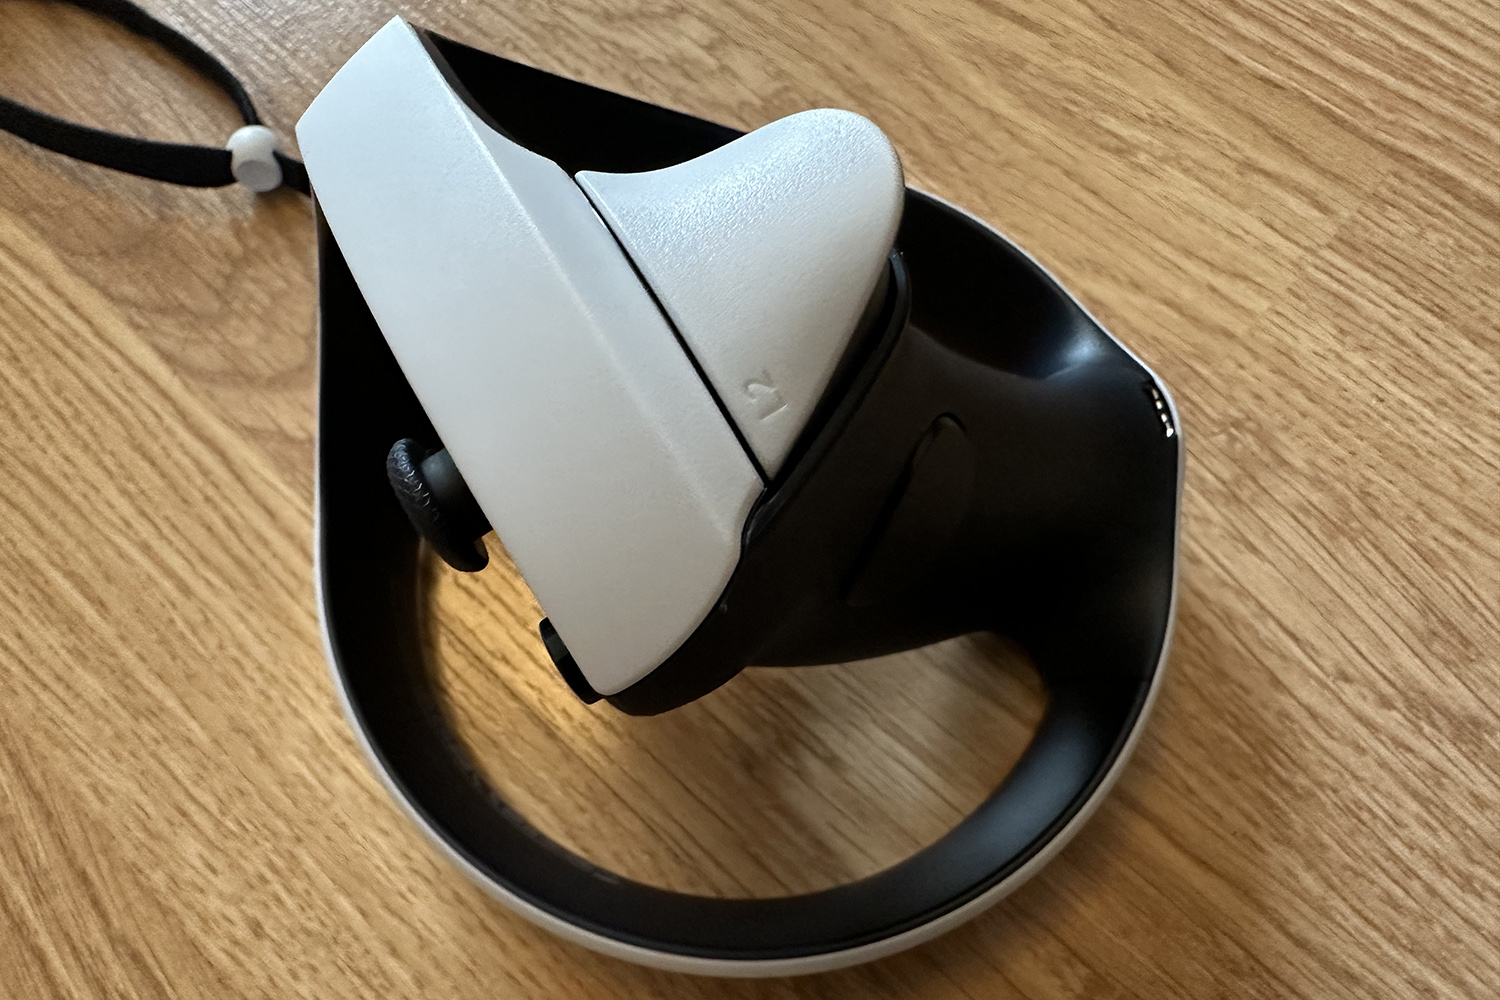 PlayStation VR2 unboxing: Here's your best look yet at Sony's